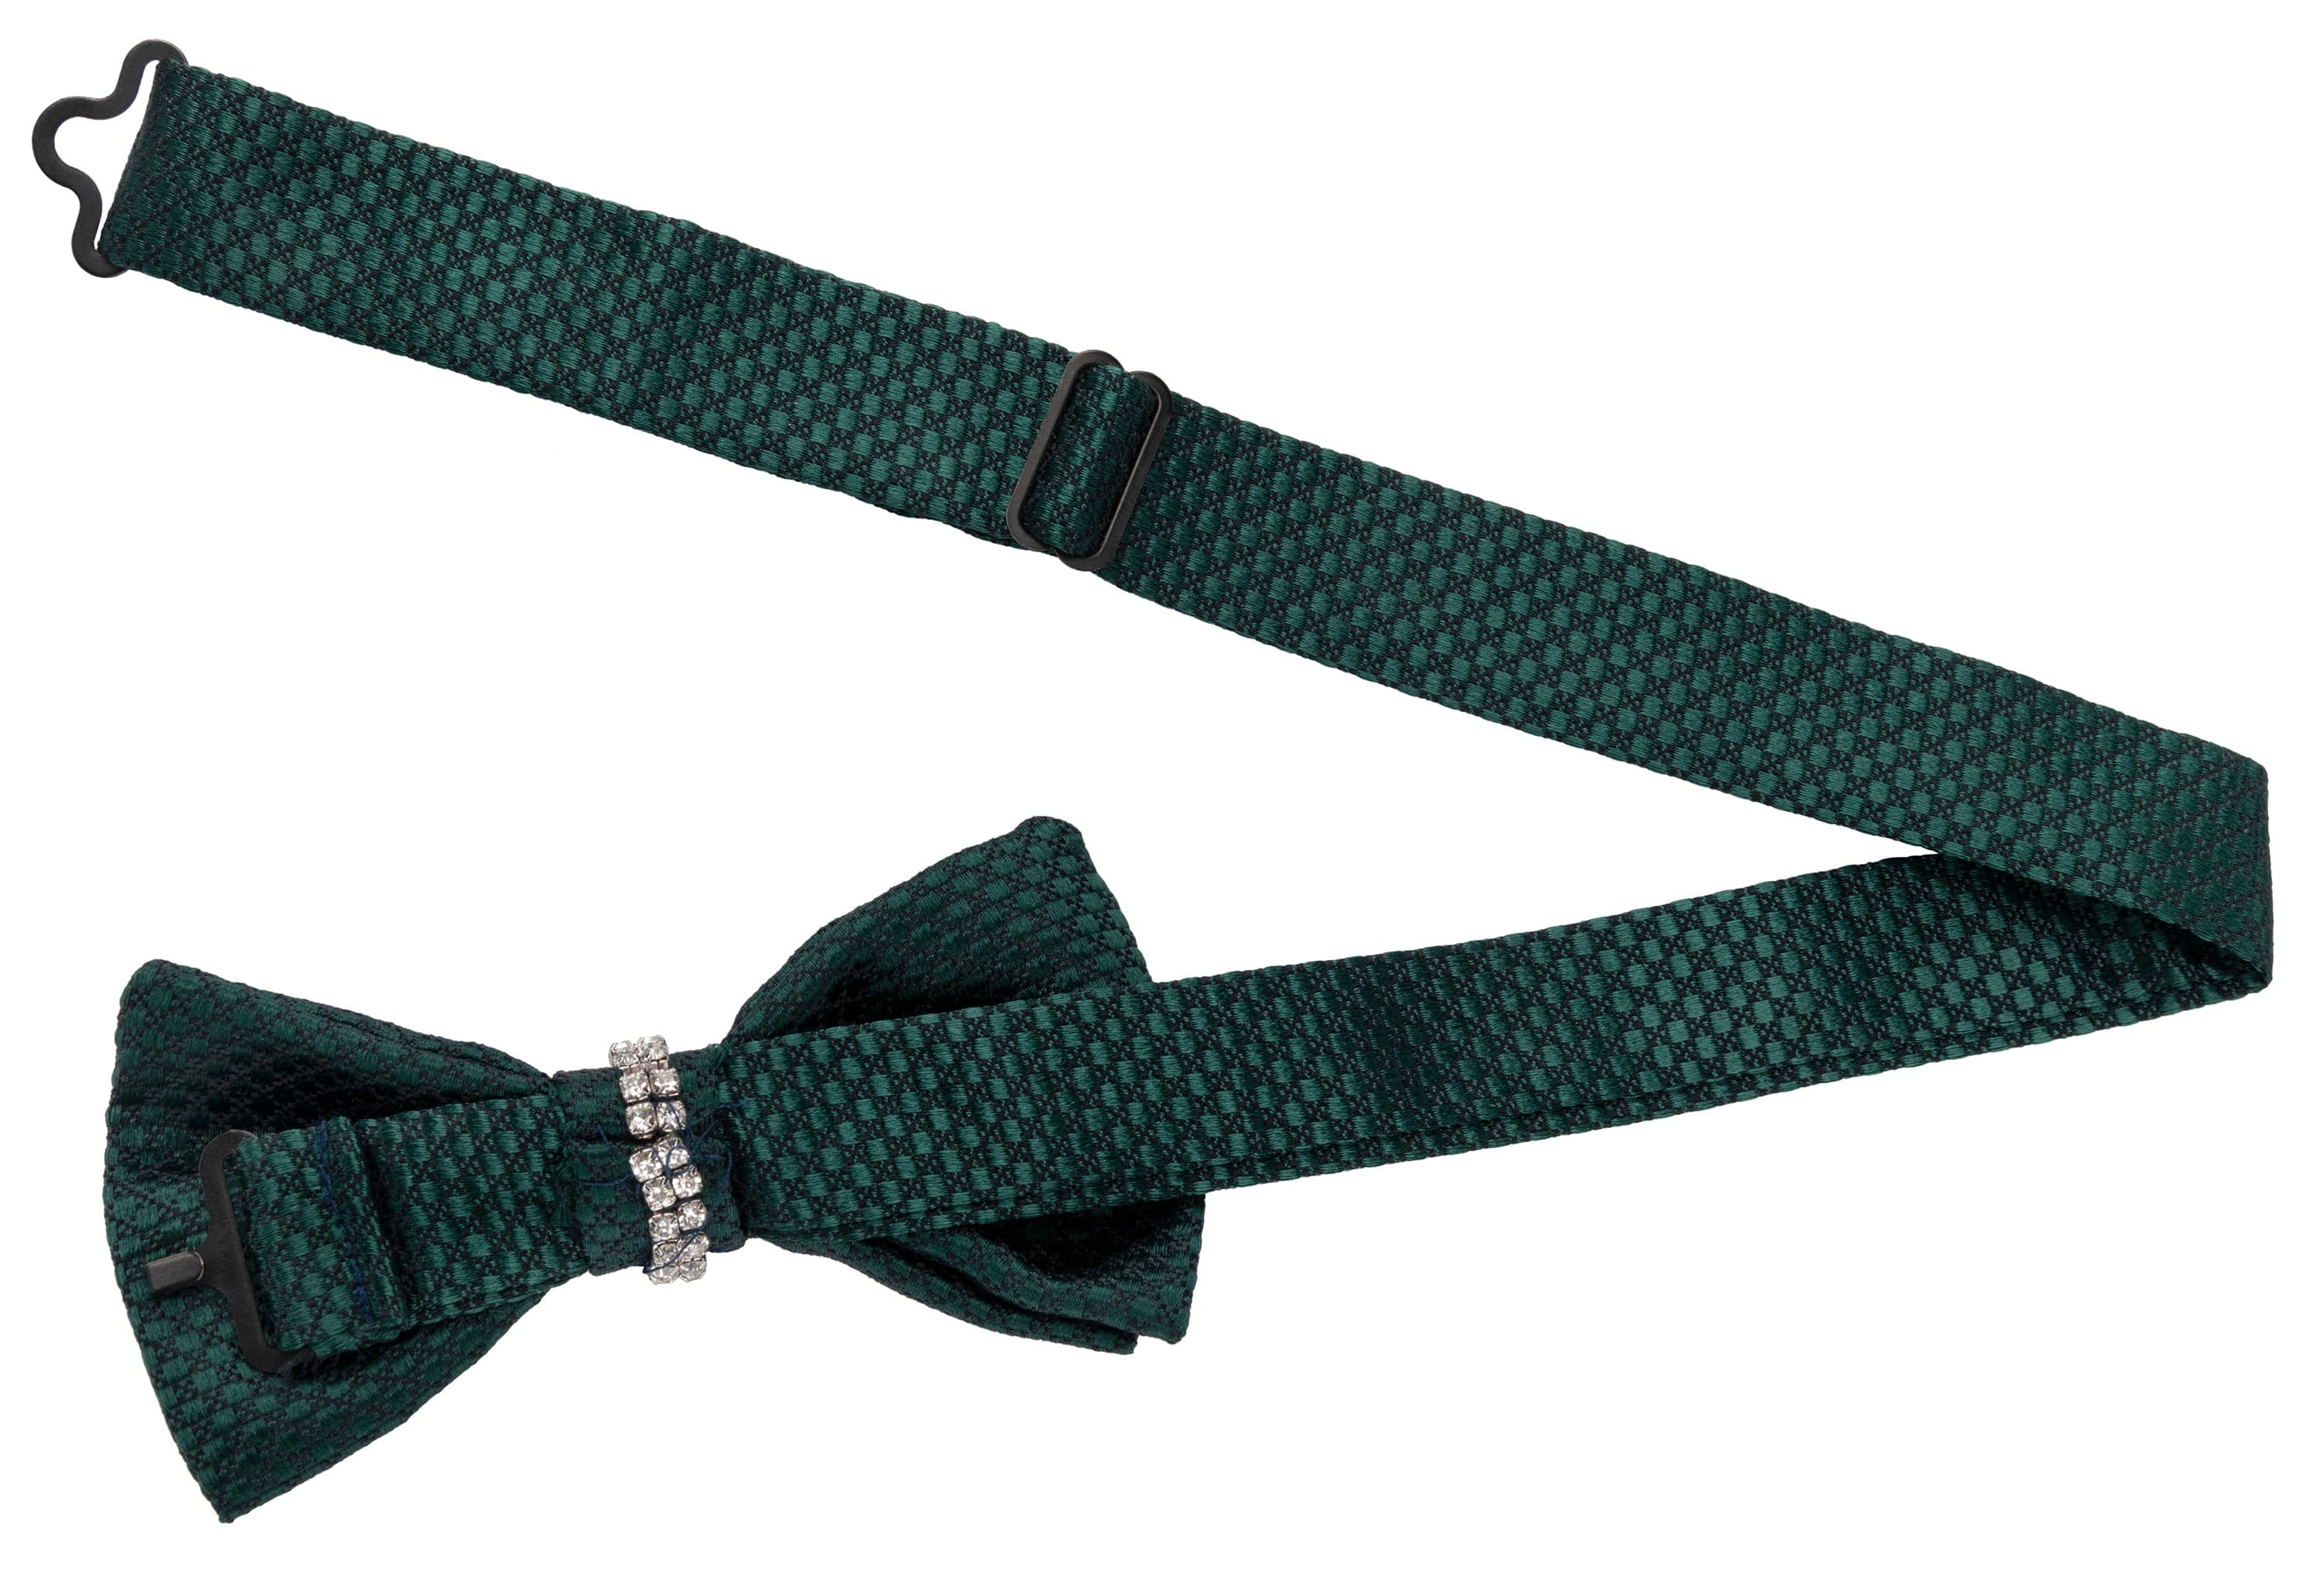 Lucky Bow Tie with Crystals (100% Silk, Green)